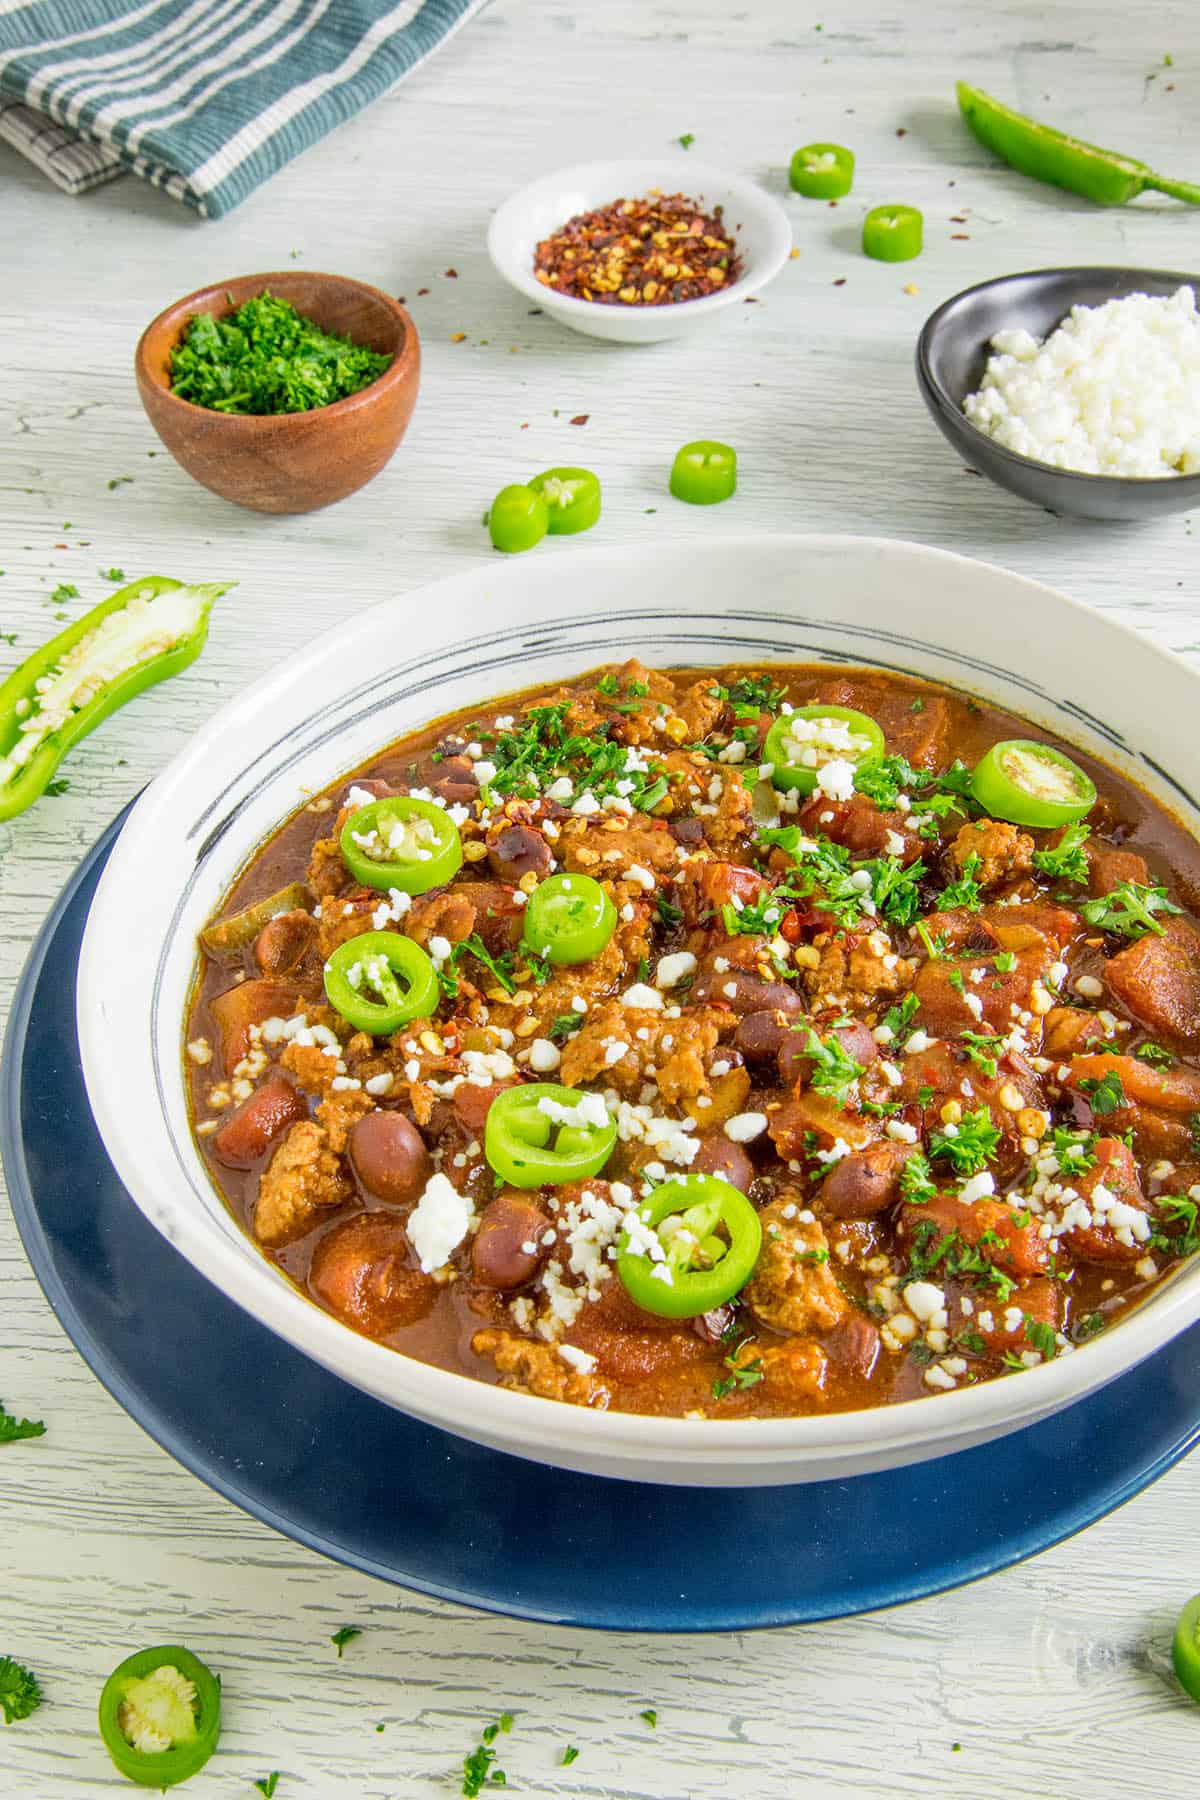 A bowl full of my recipe, The Easiest Chili Recipe in the World